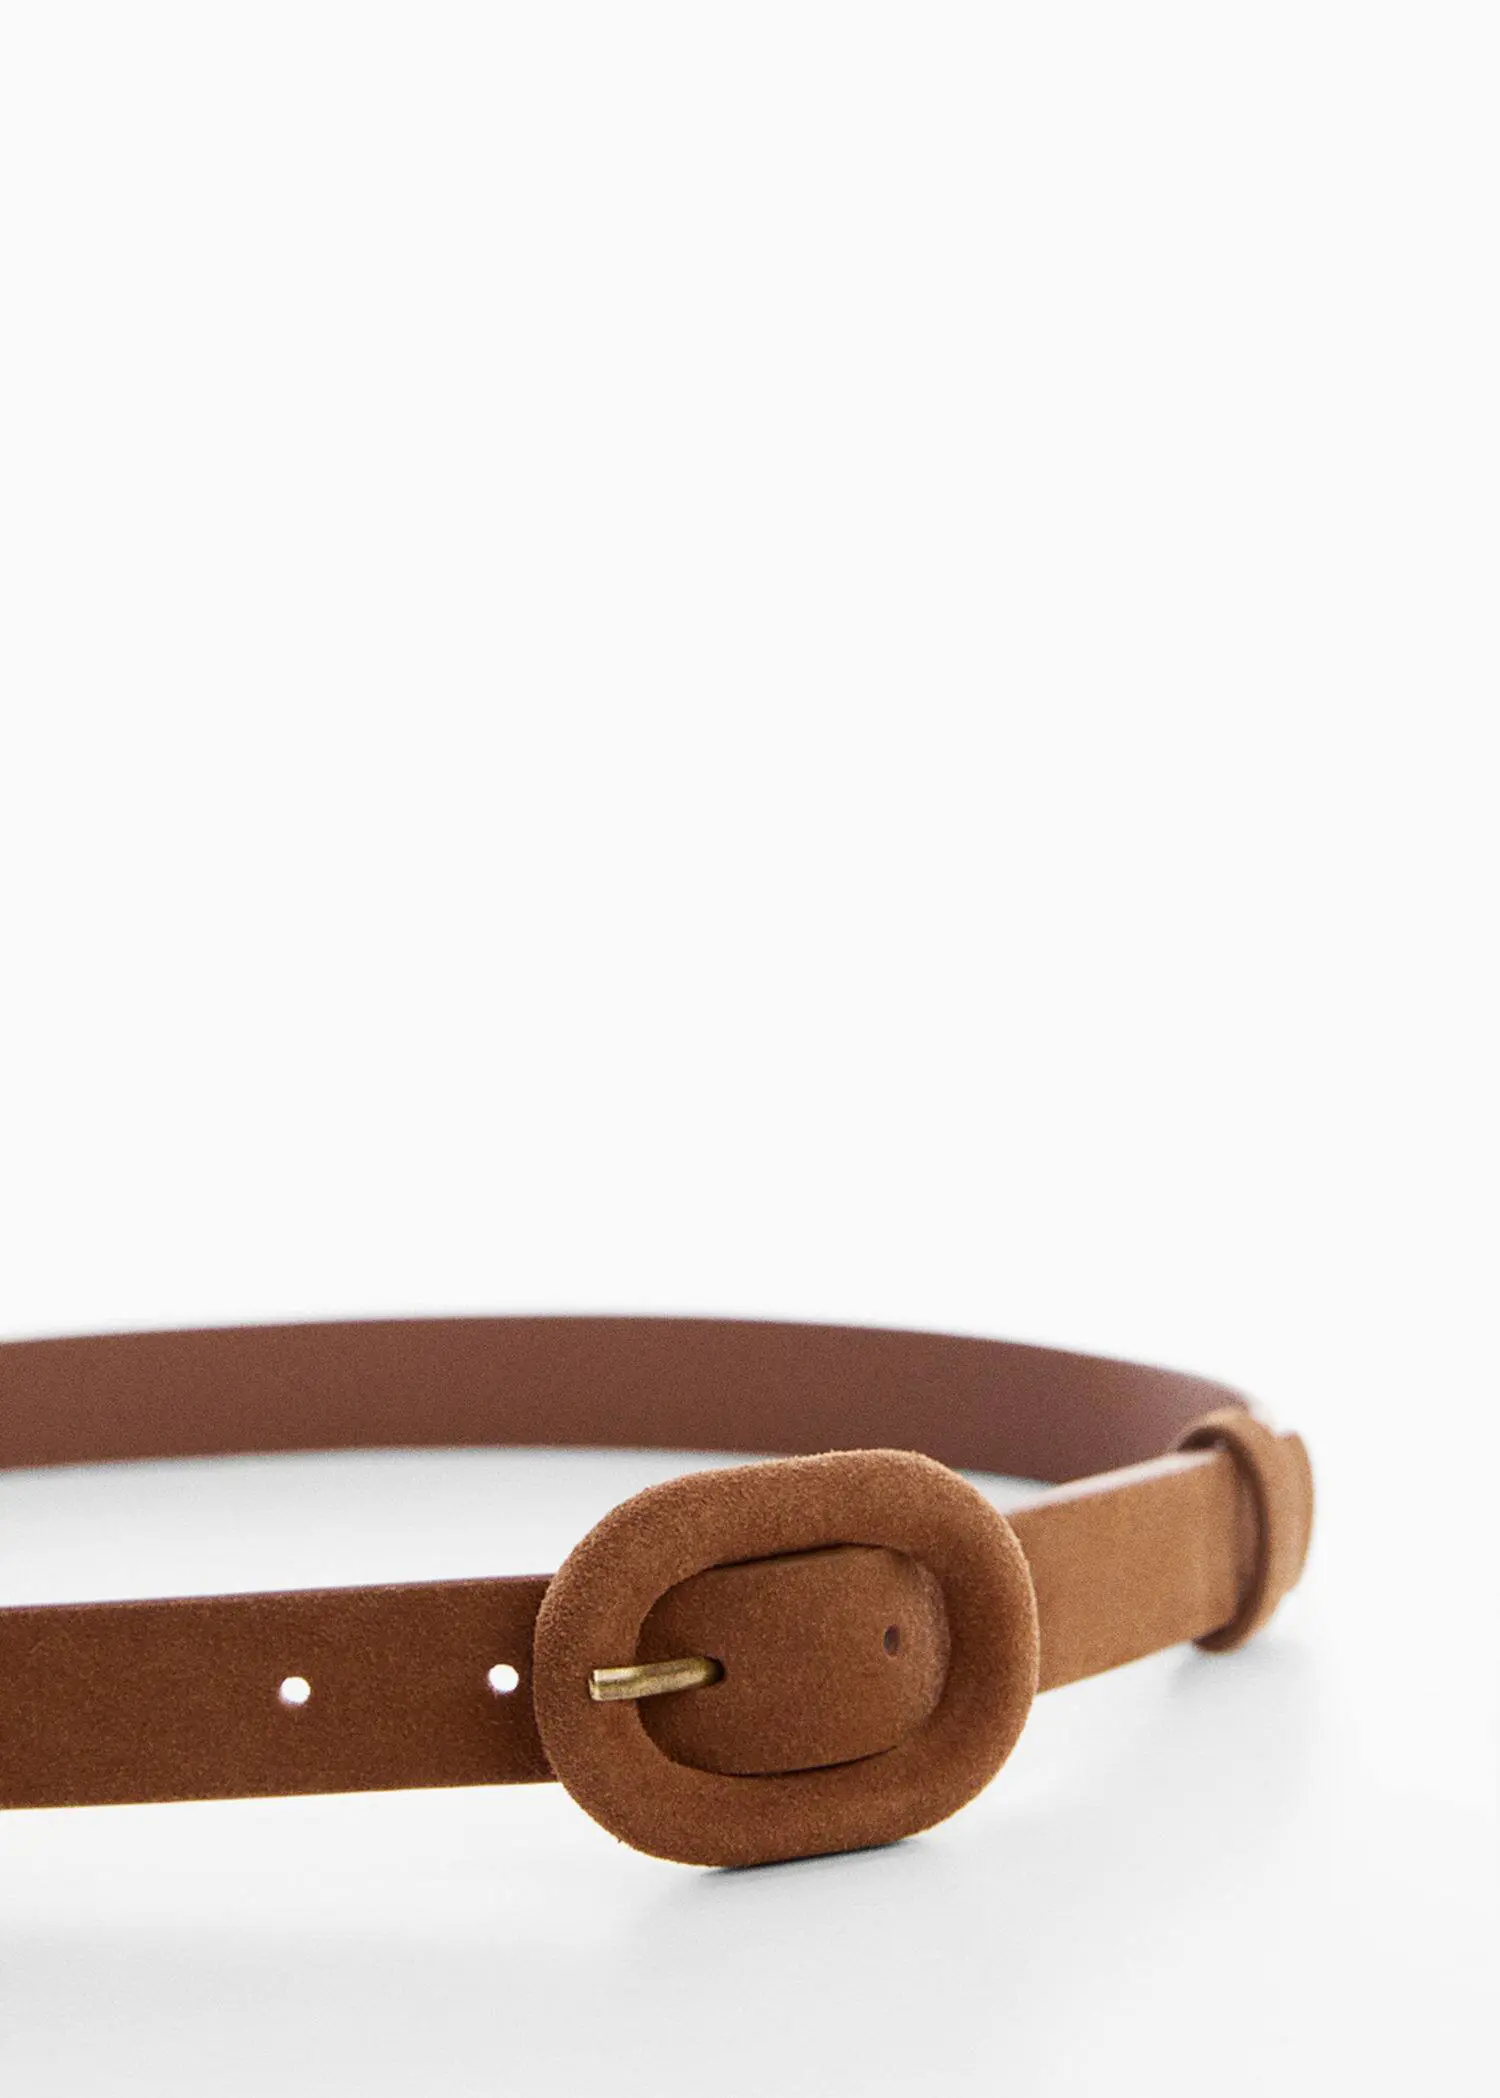 Mango Leather belt with wide buckle. 3